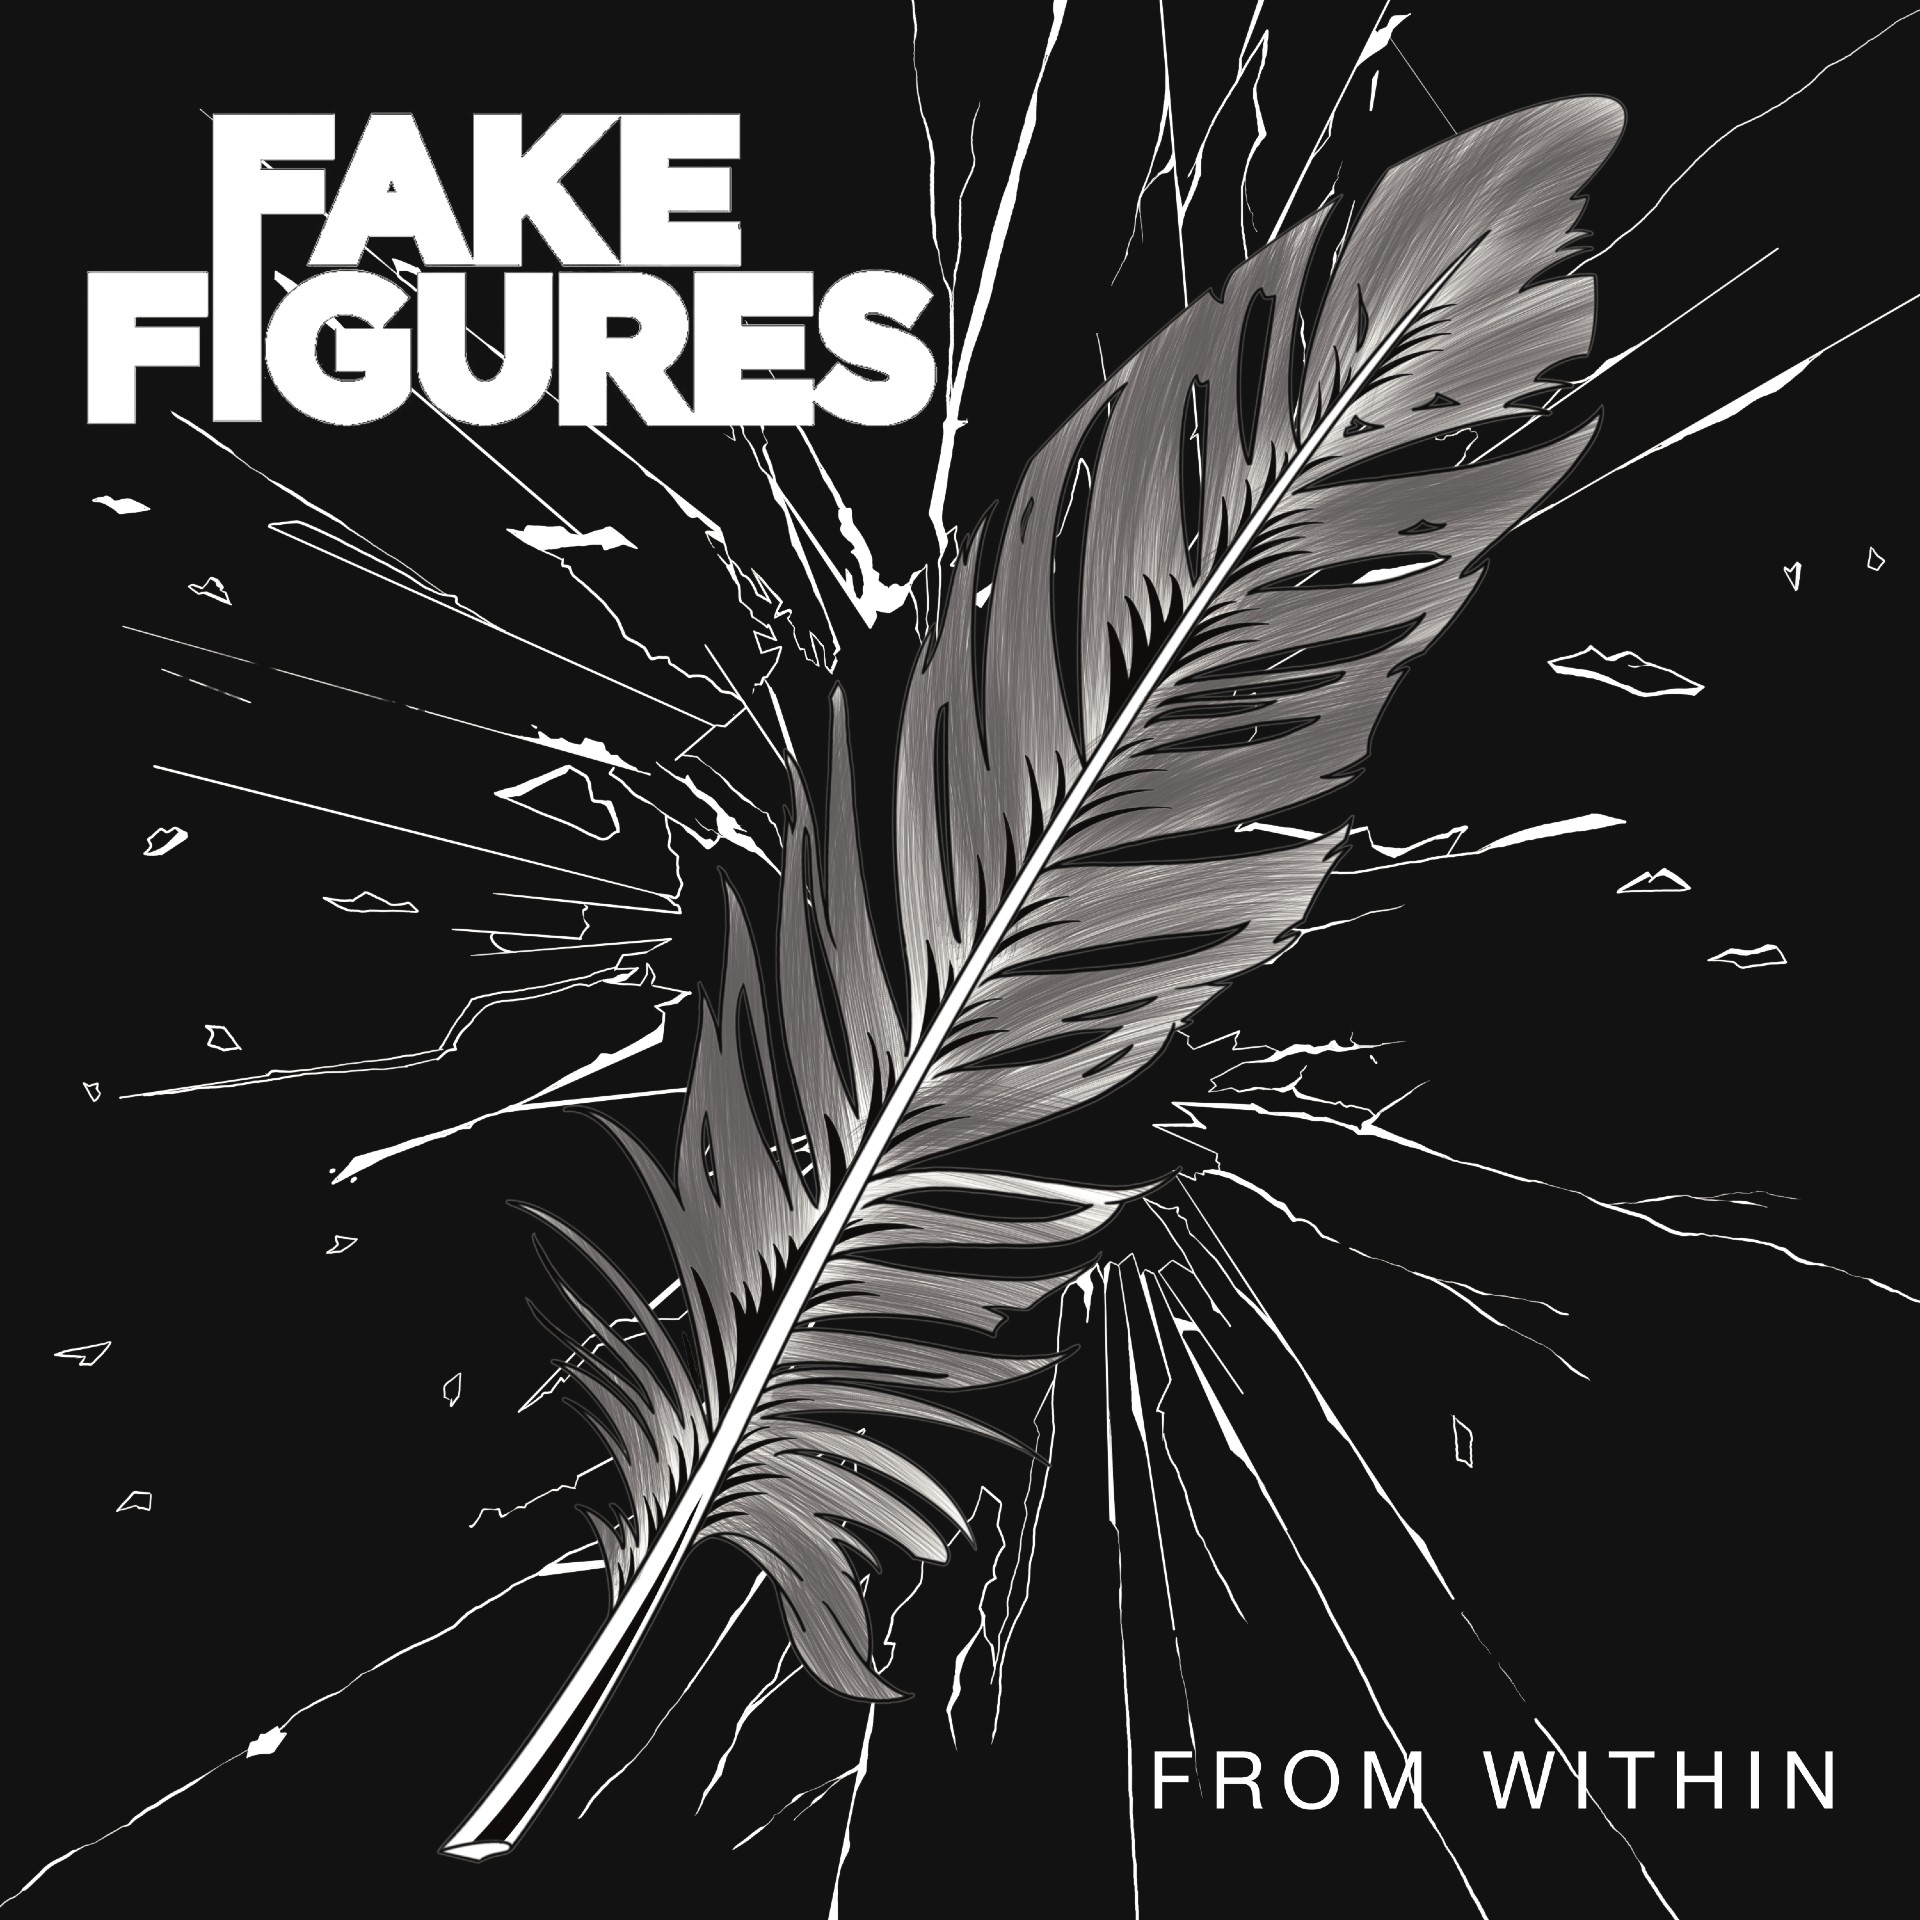 Fake Figures ‘From Within’ EP album artwork